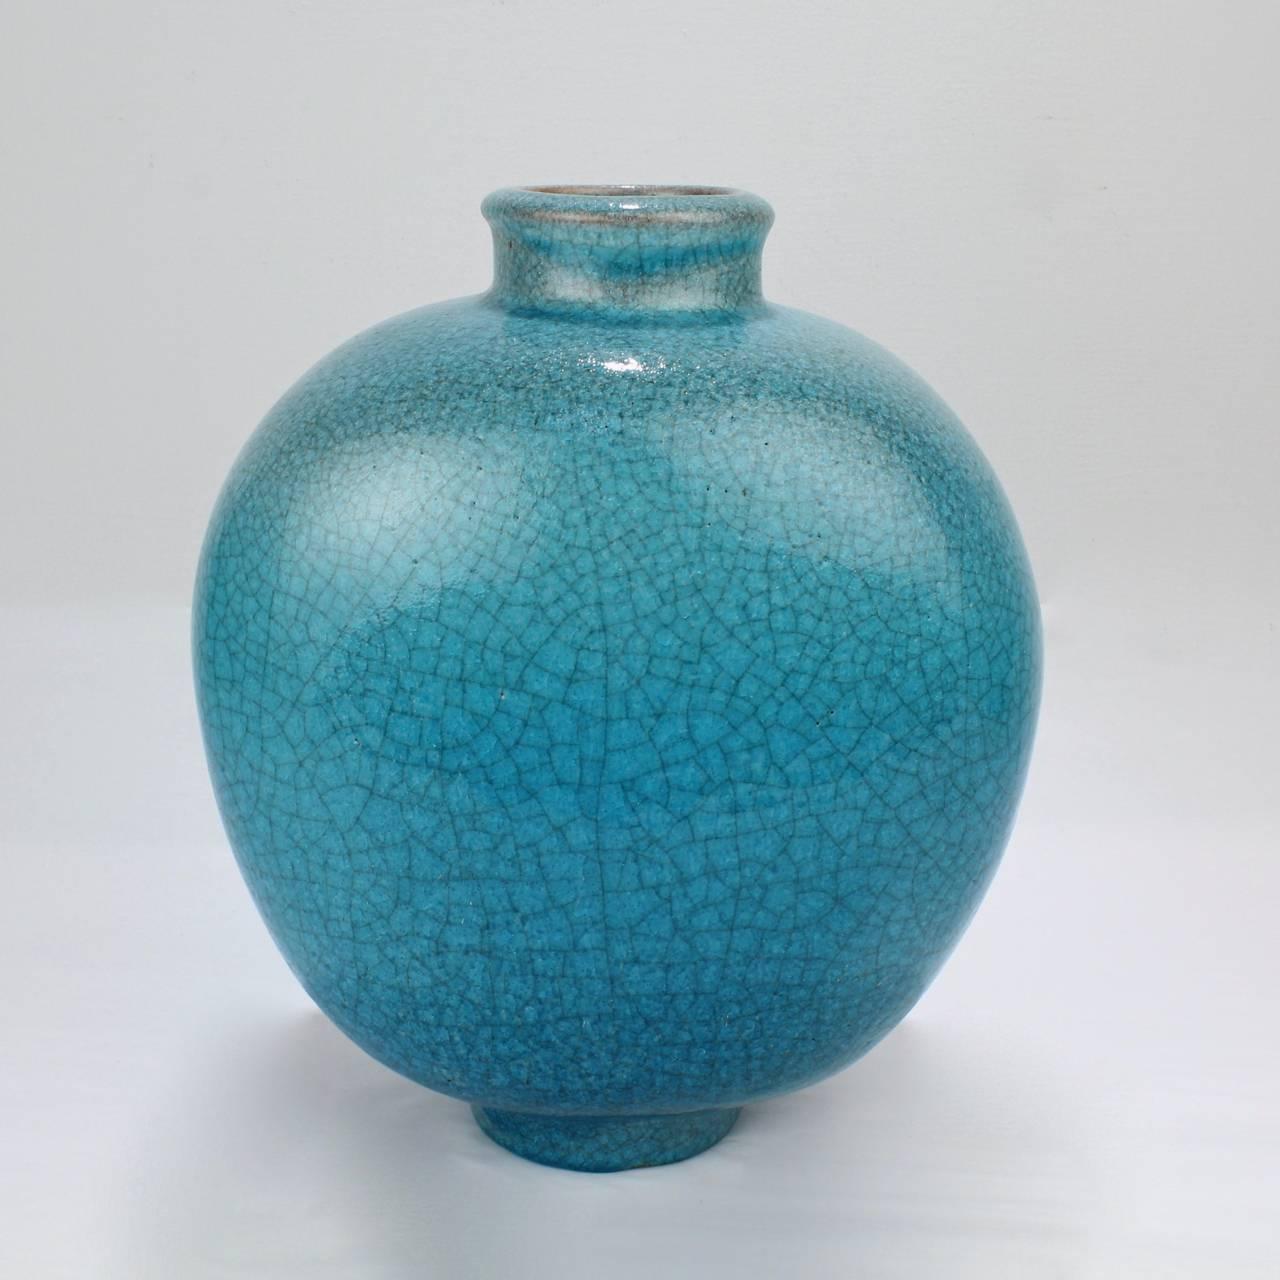 A large turquoise crackle glaze vase by Fridegart Glatzle for Karlsruhe Majolica.

Base bears a Karlsruhe factory mark / Made in Germany / SH / and a Chantal mark.

Height: circa 11 1/4 in.

Items purchased from David Sterner Antiques must